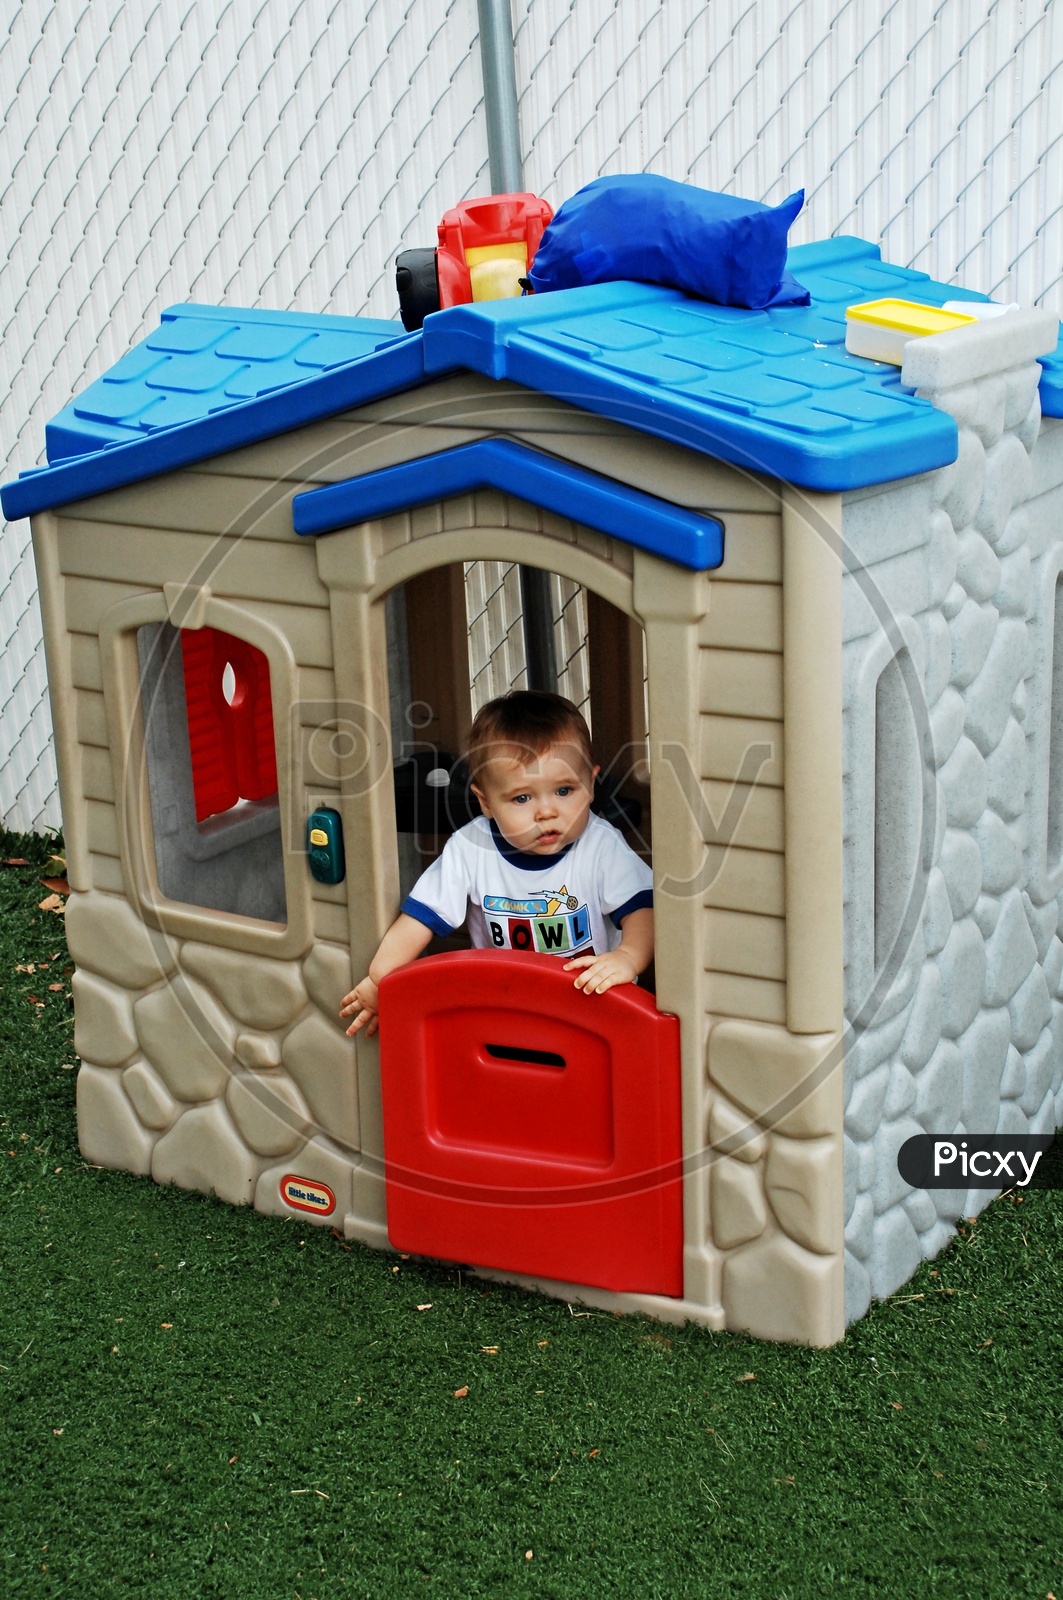 Toddler playing in the play area